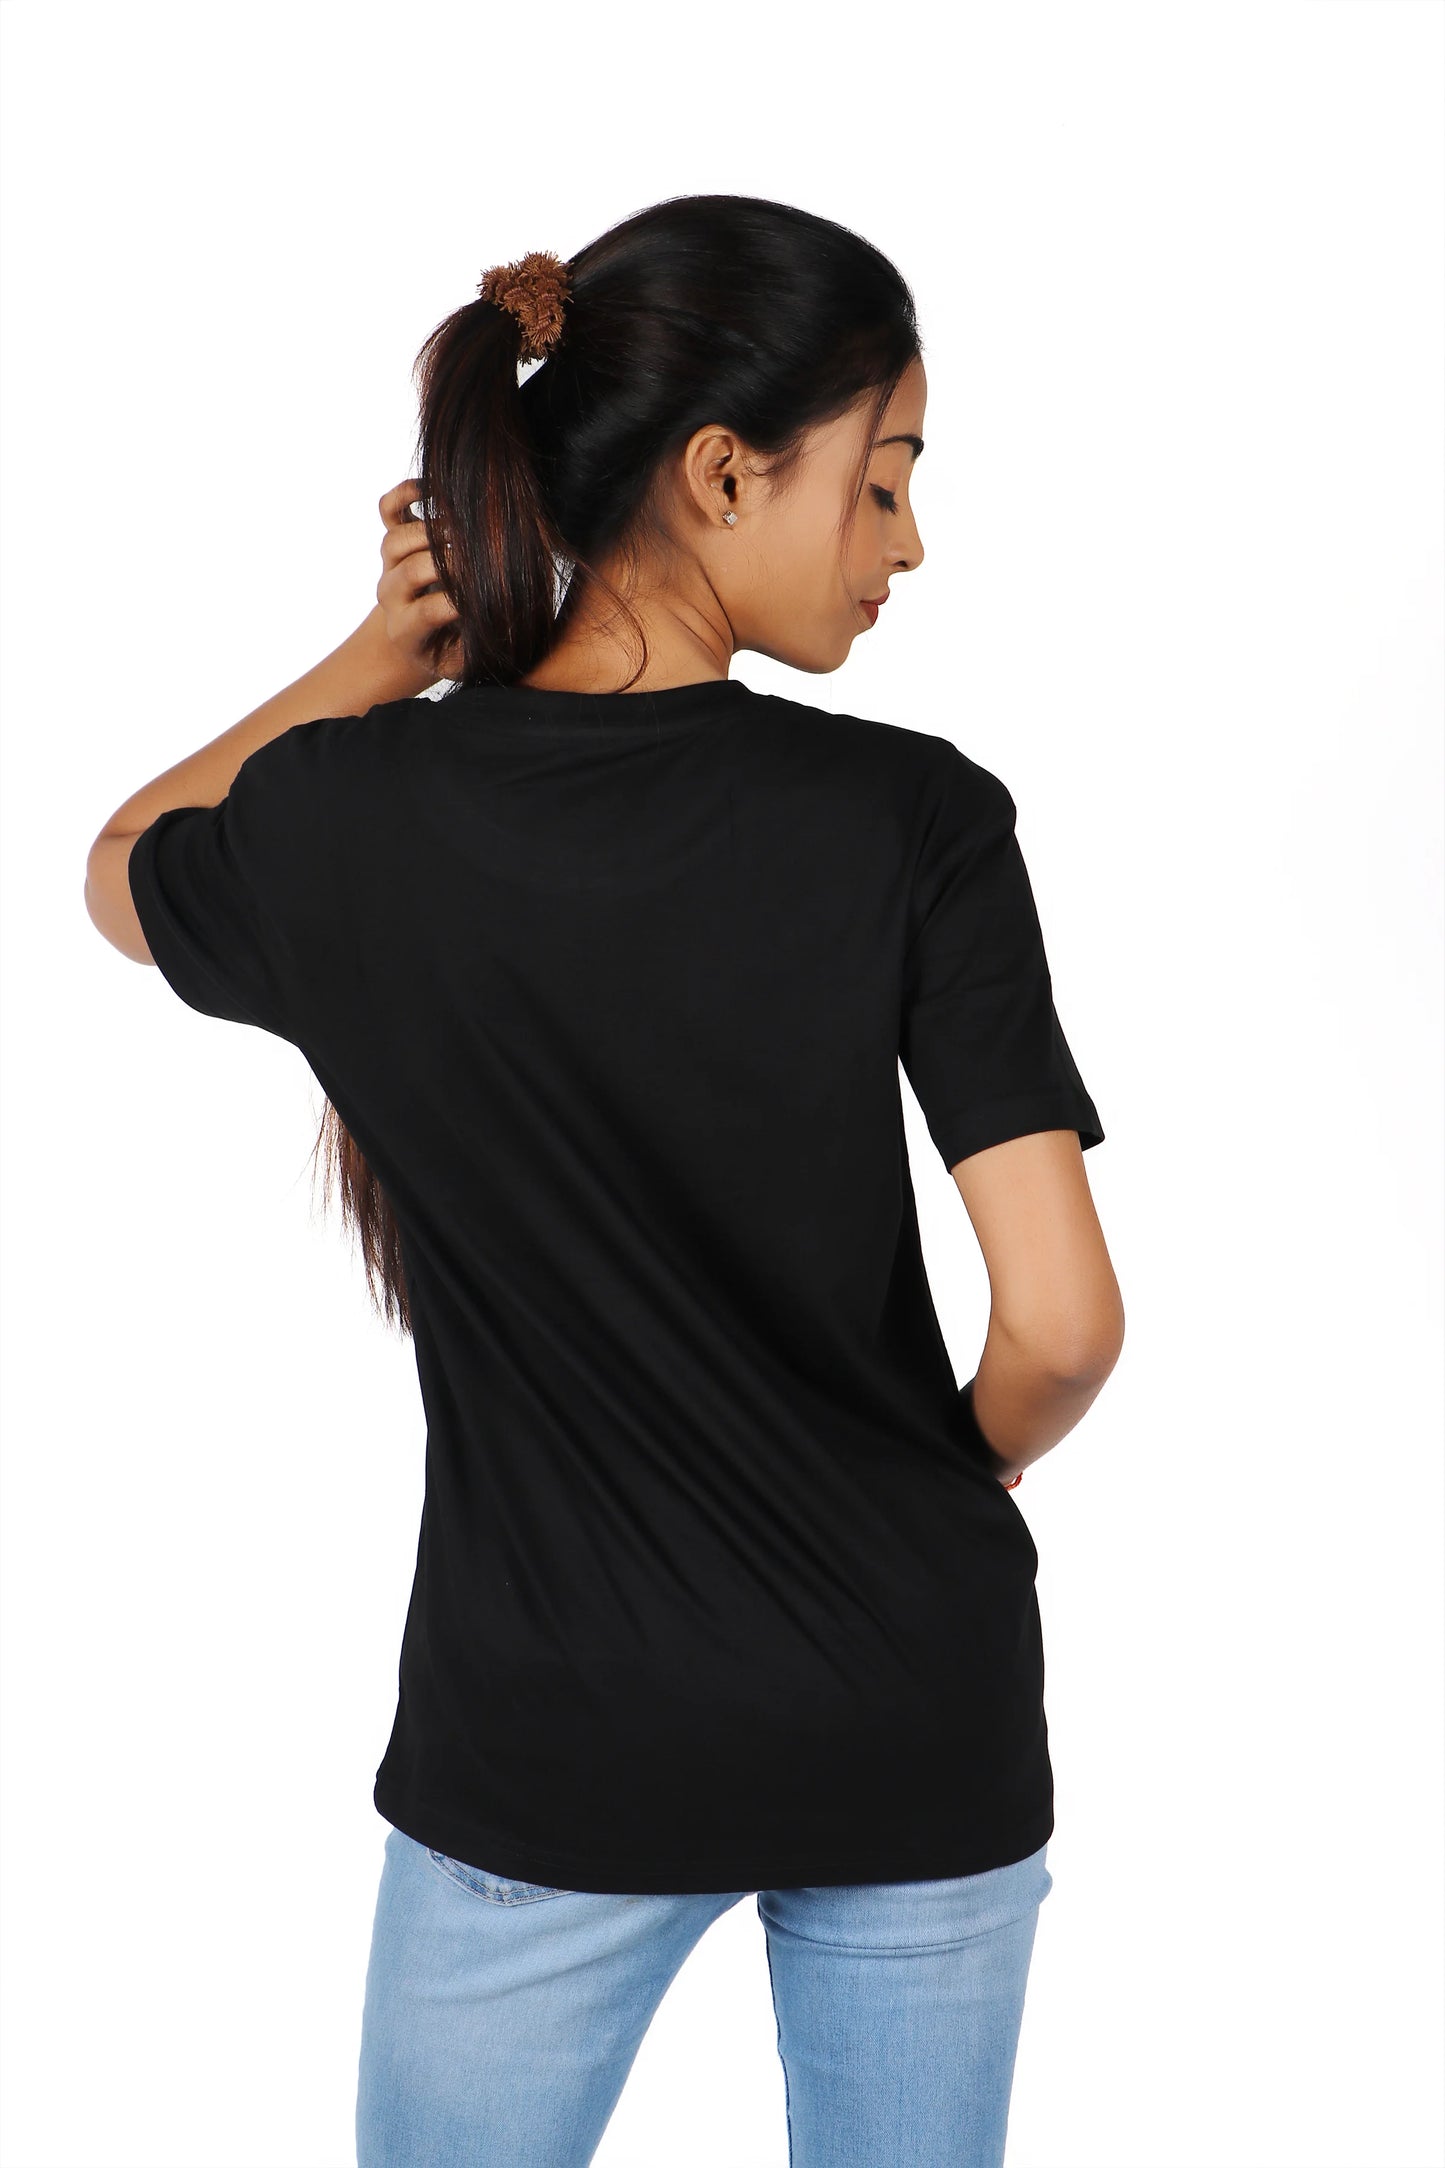 Achieve effortless appeal with this black plain T-shirt, a fashionable and easygoing choice for your wardrobe.